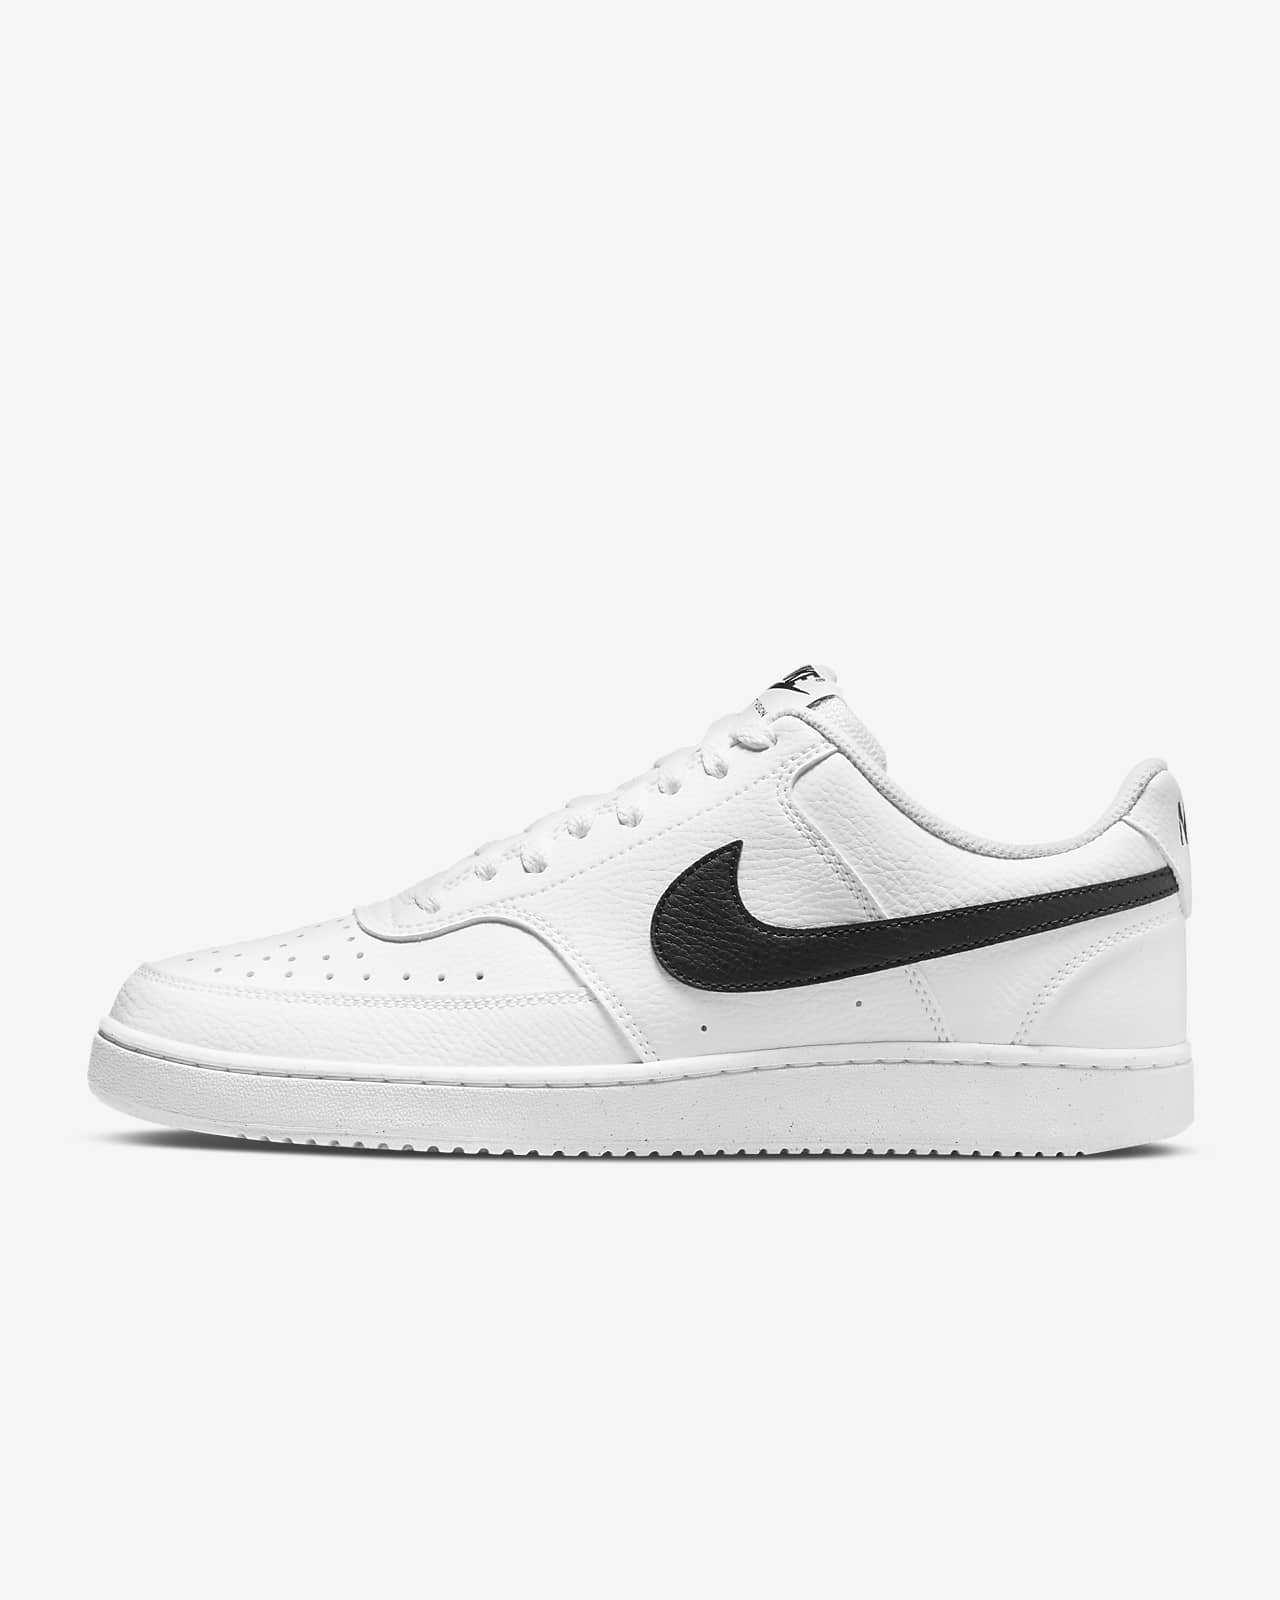 Chaussure Vision Low Next Nature pour Homme. Nike FR